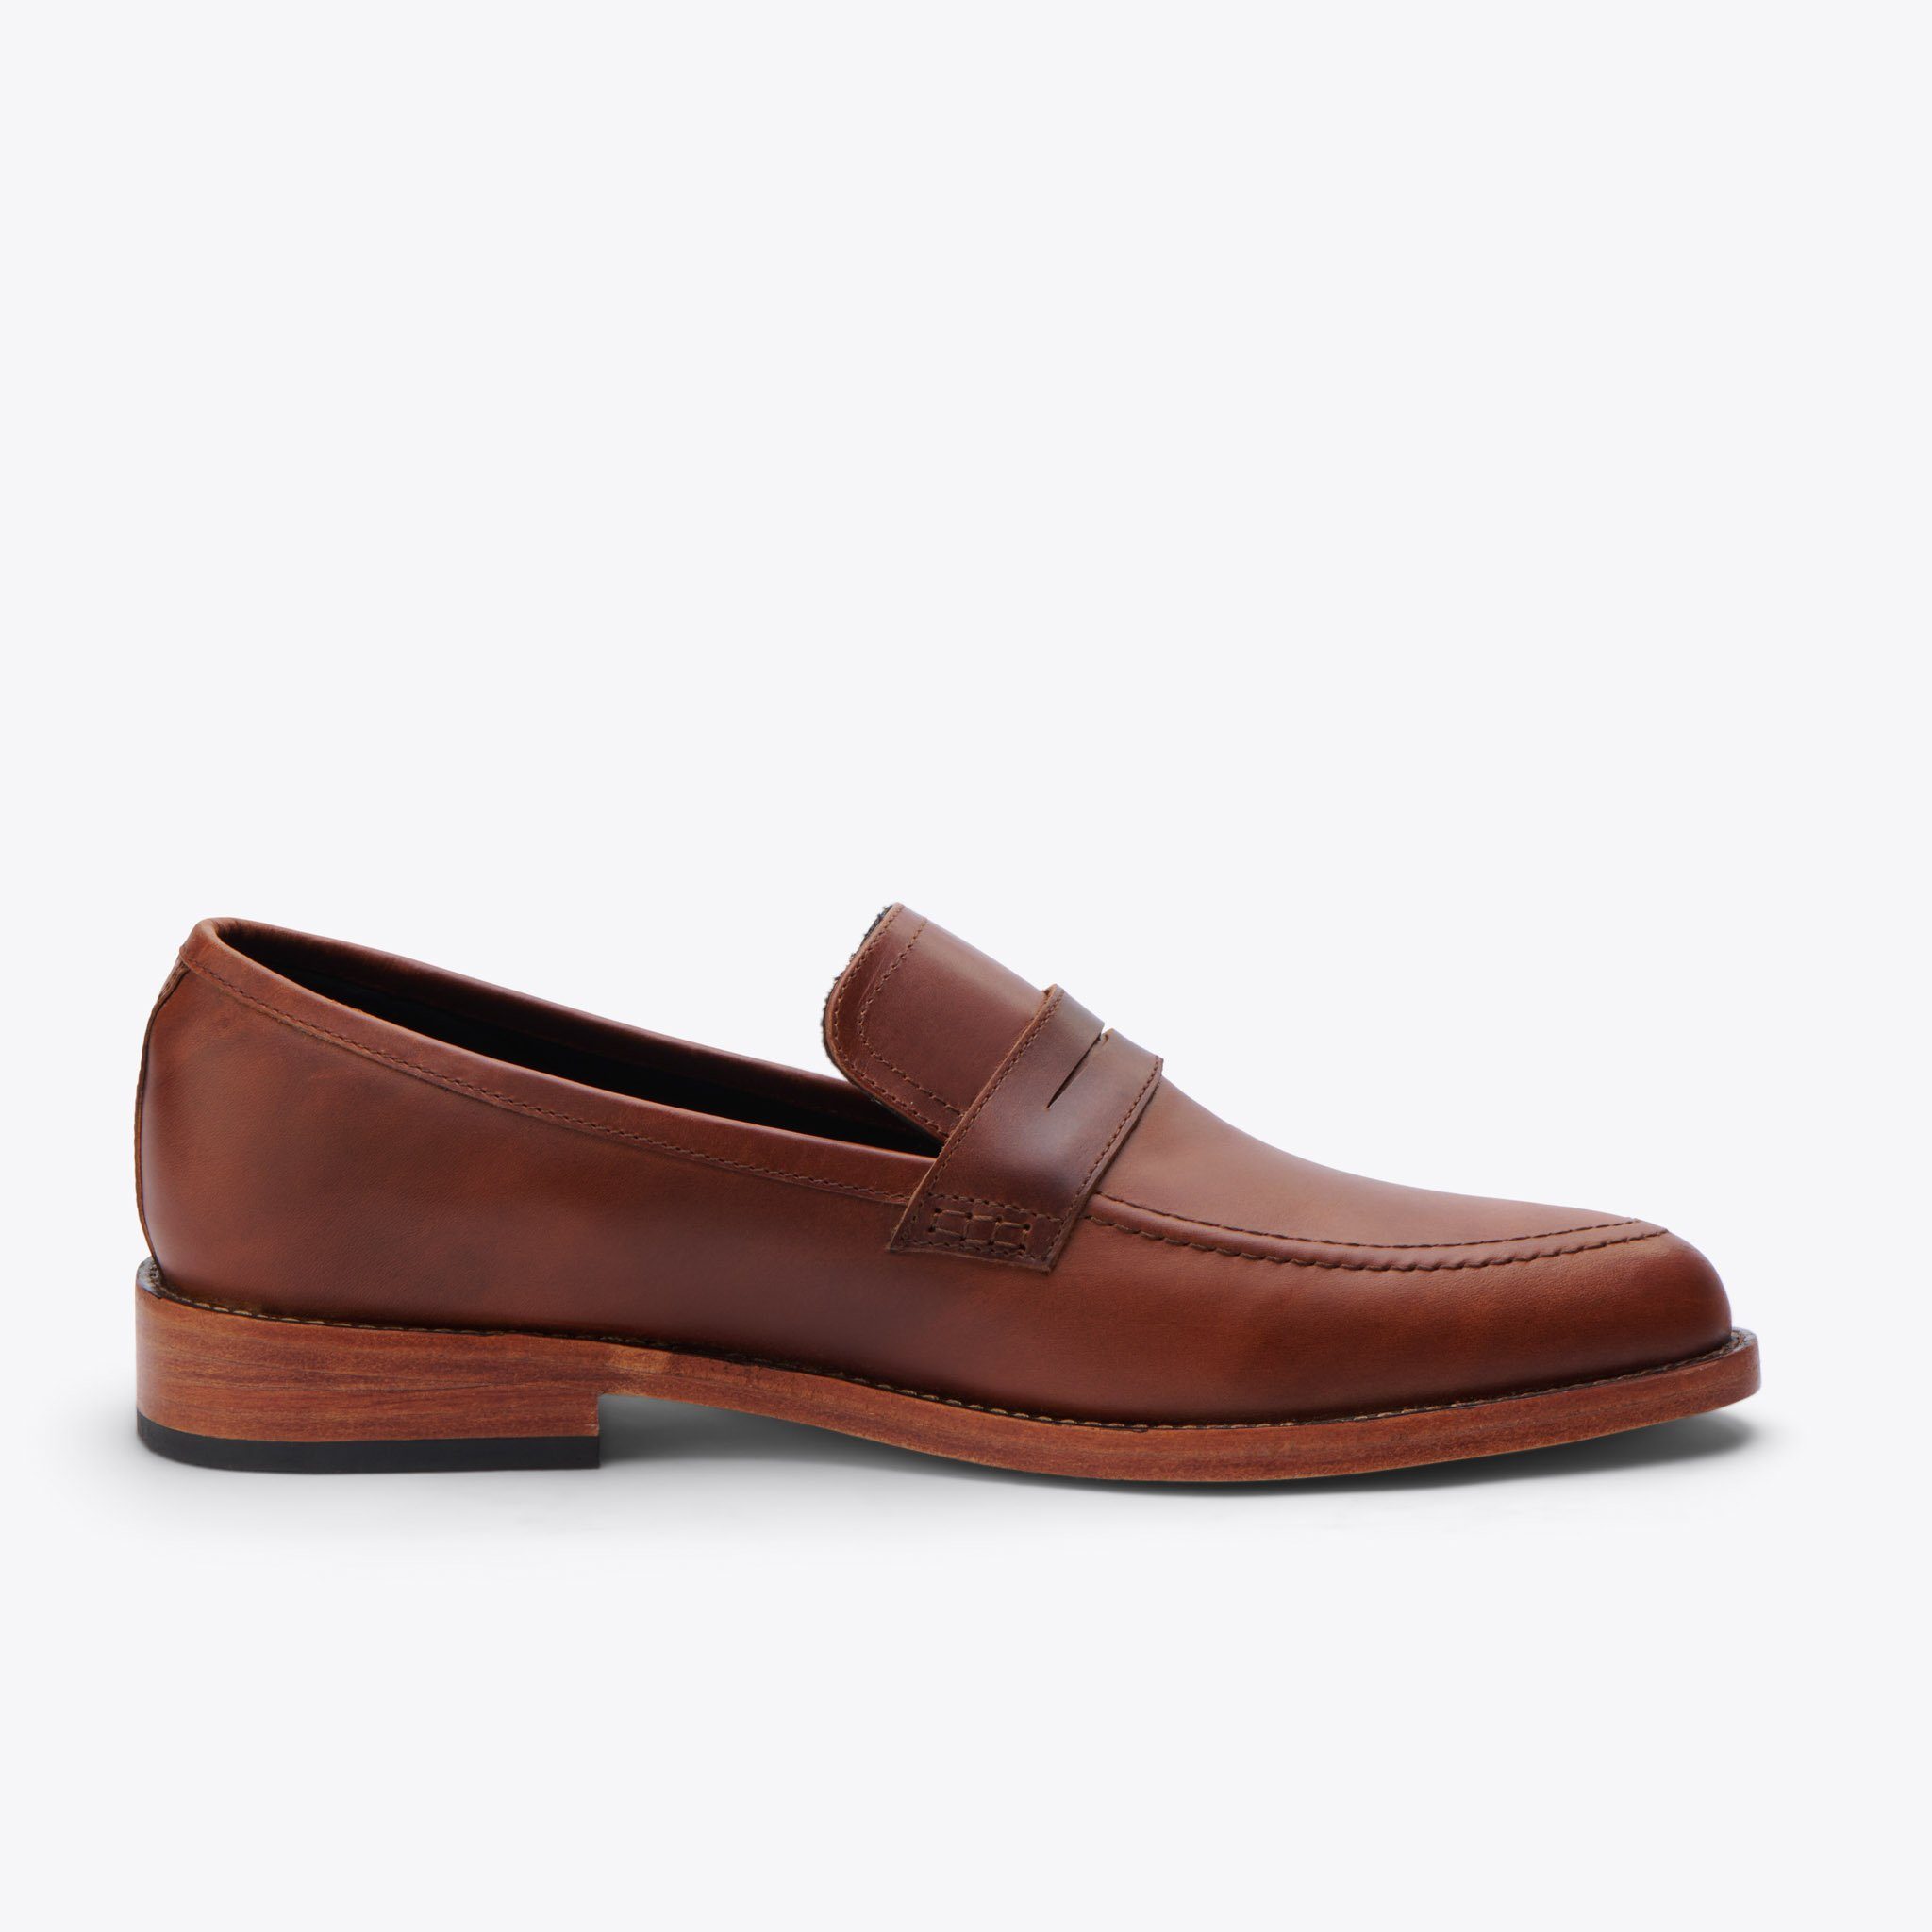 Men's Penny Loafer | Handcrafted & Ethically Made | Nisolo